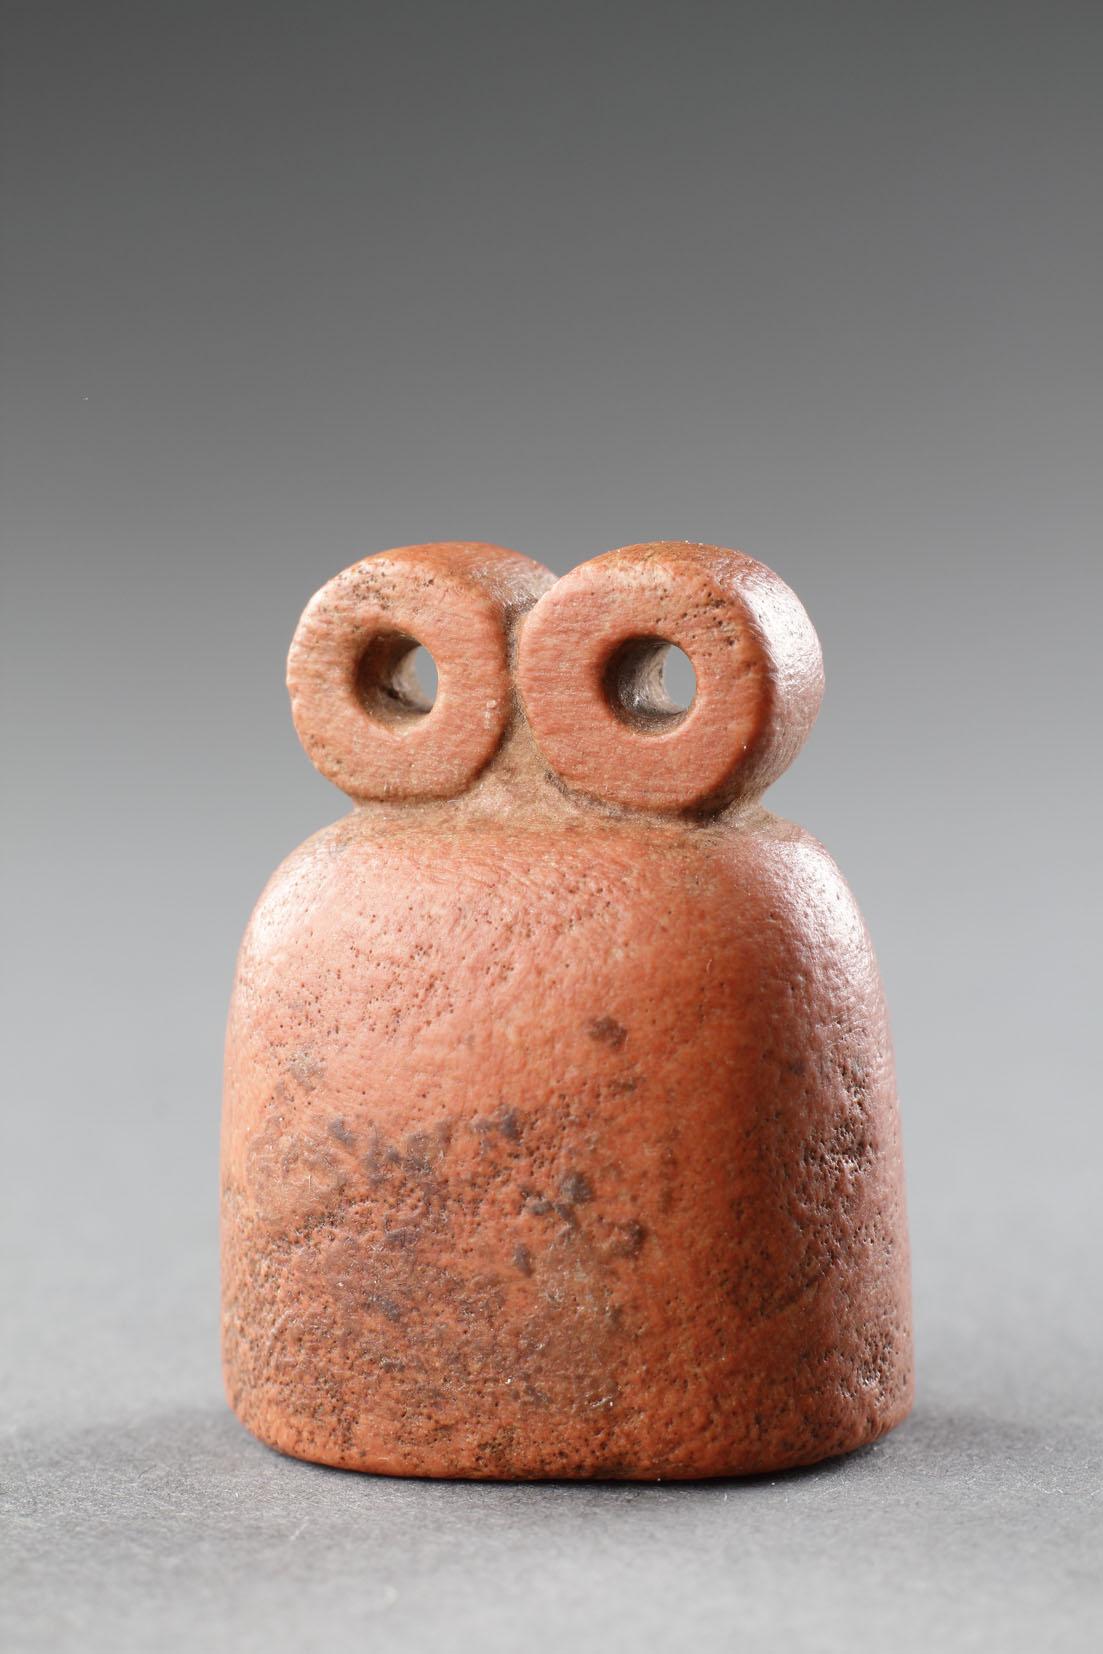 A Fine Mesopotamian ‘Eye Idol’
Red Quartzite
Northern Mesopotamia
Circa 3200 BC

Size: 3.5cm high, 3cm wide, 2cm deep - 1½ ins high, 1¼ ins wide, ¾ ins deep 

Provenance: 
Sold Pierre Berge, Paris, 27th - 28th October 2006, lot 484; property of a